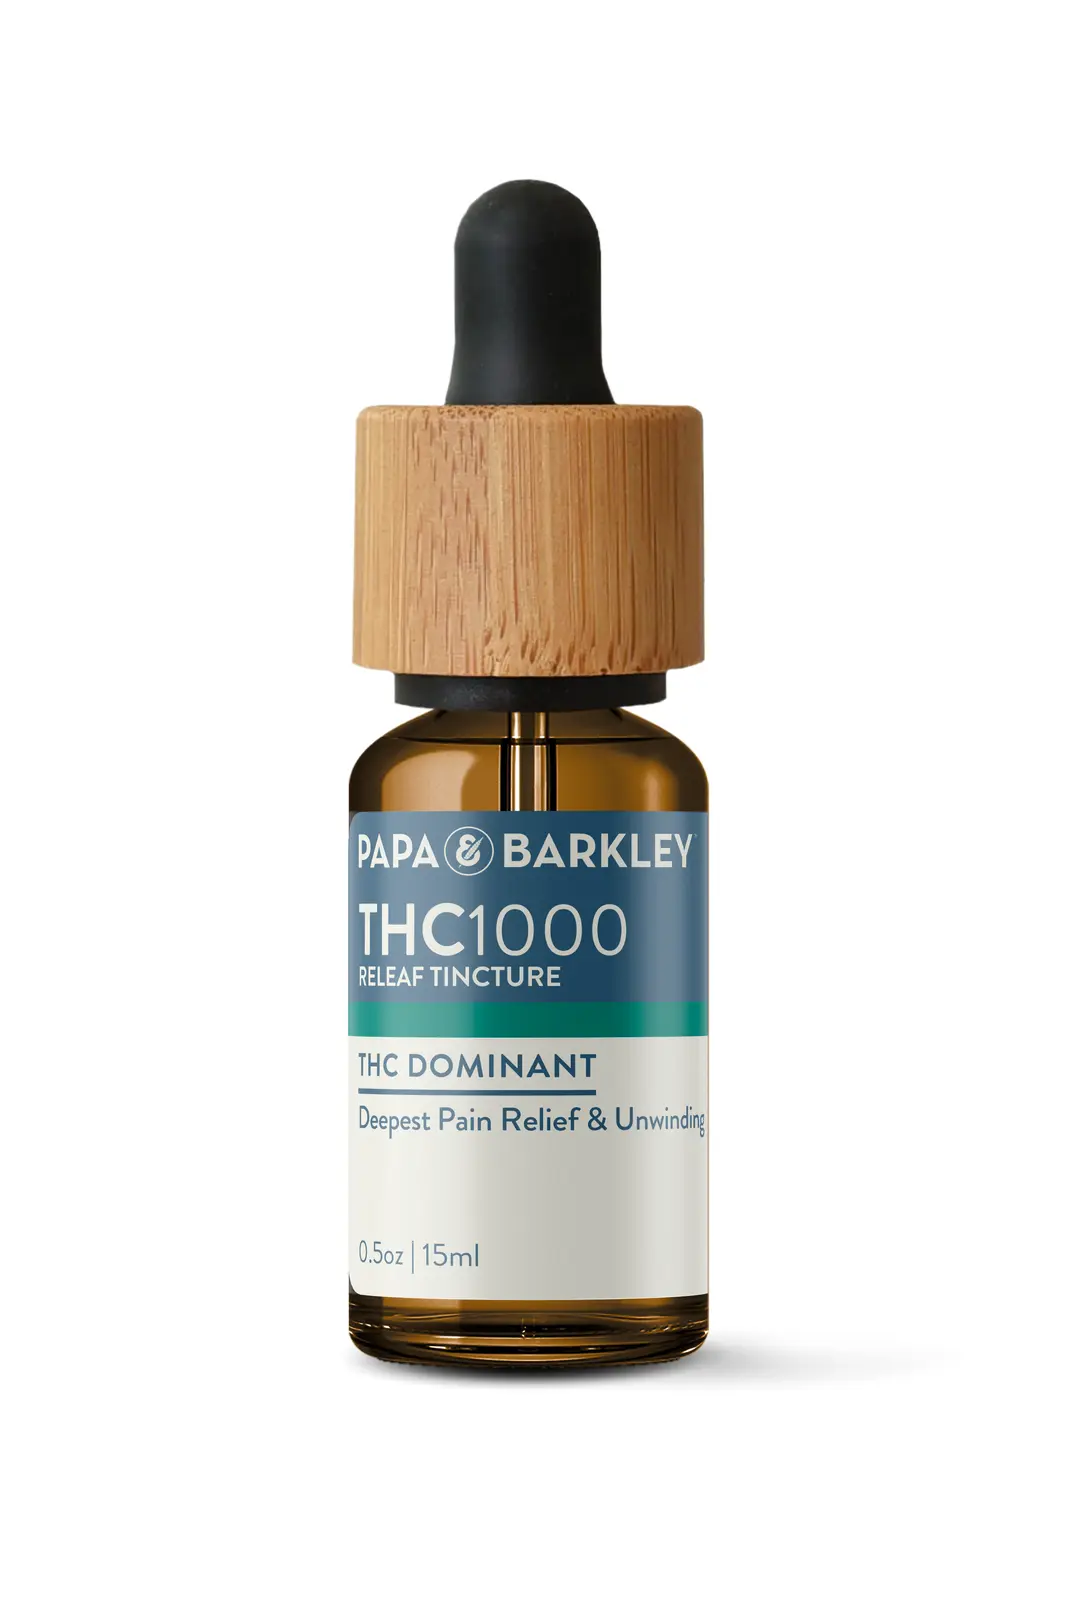 product preview image for THC1000 Releaf Tincture - 15ml